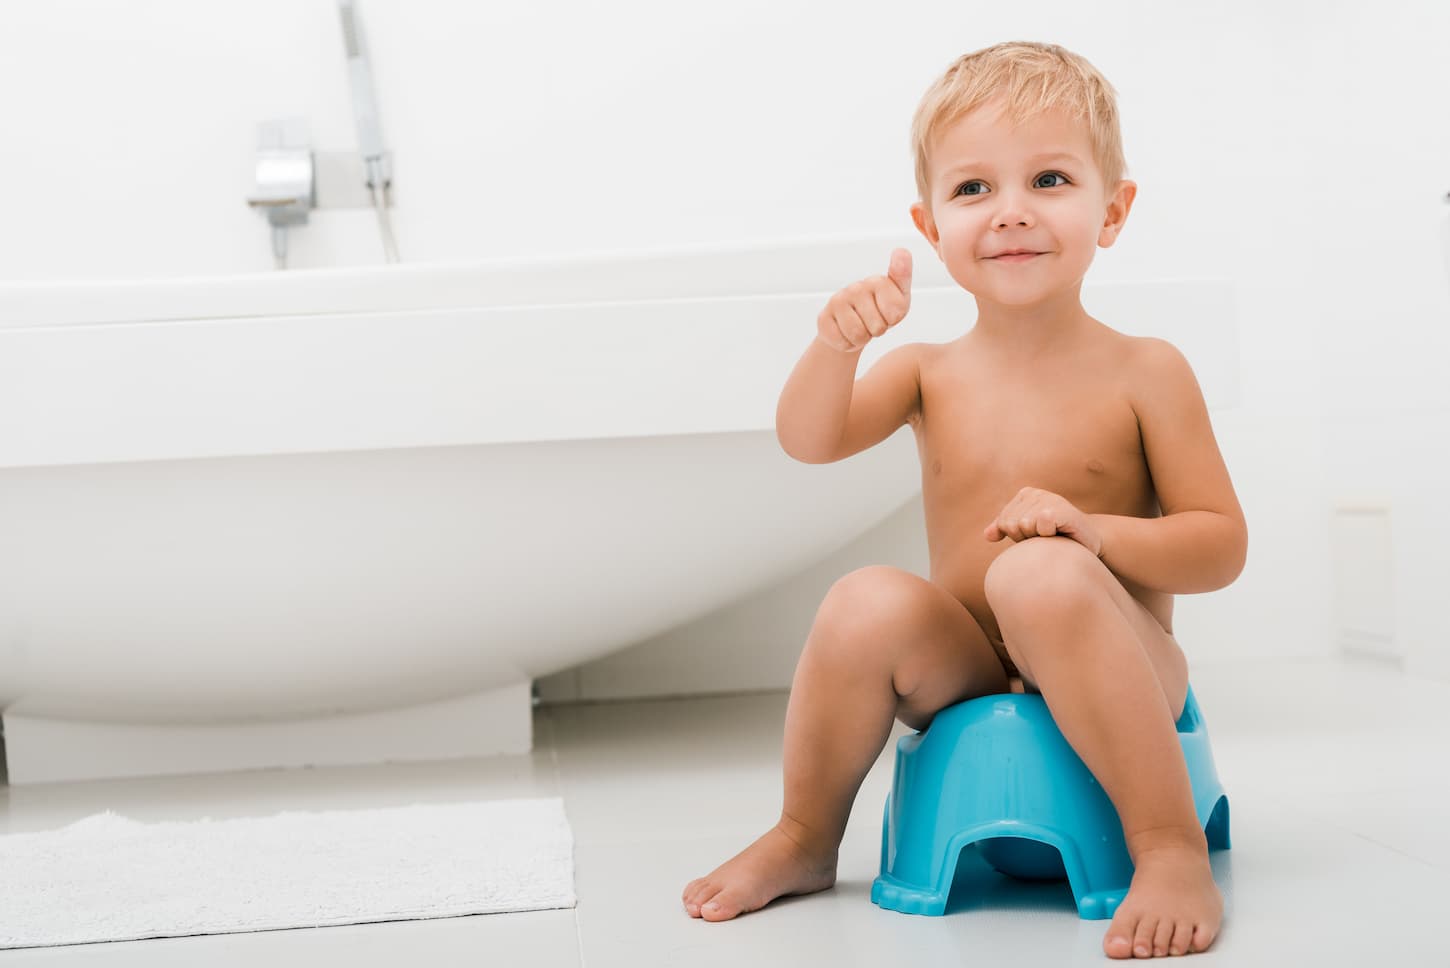 An image of a happy naked toddler boy gesturing while sitting on a blue potty.